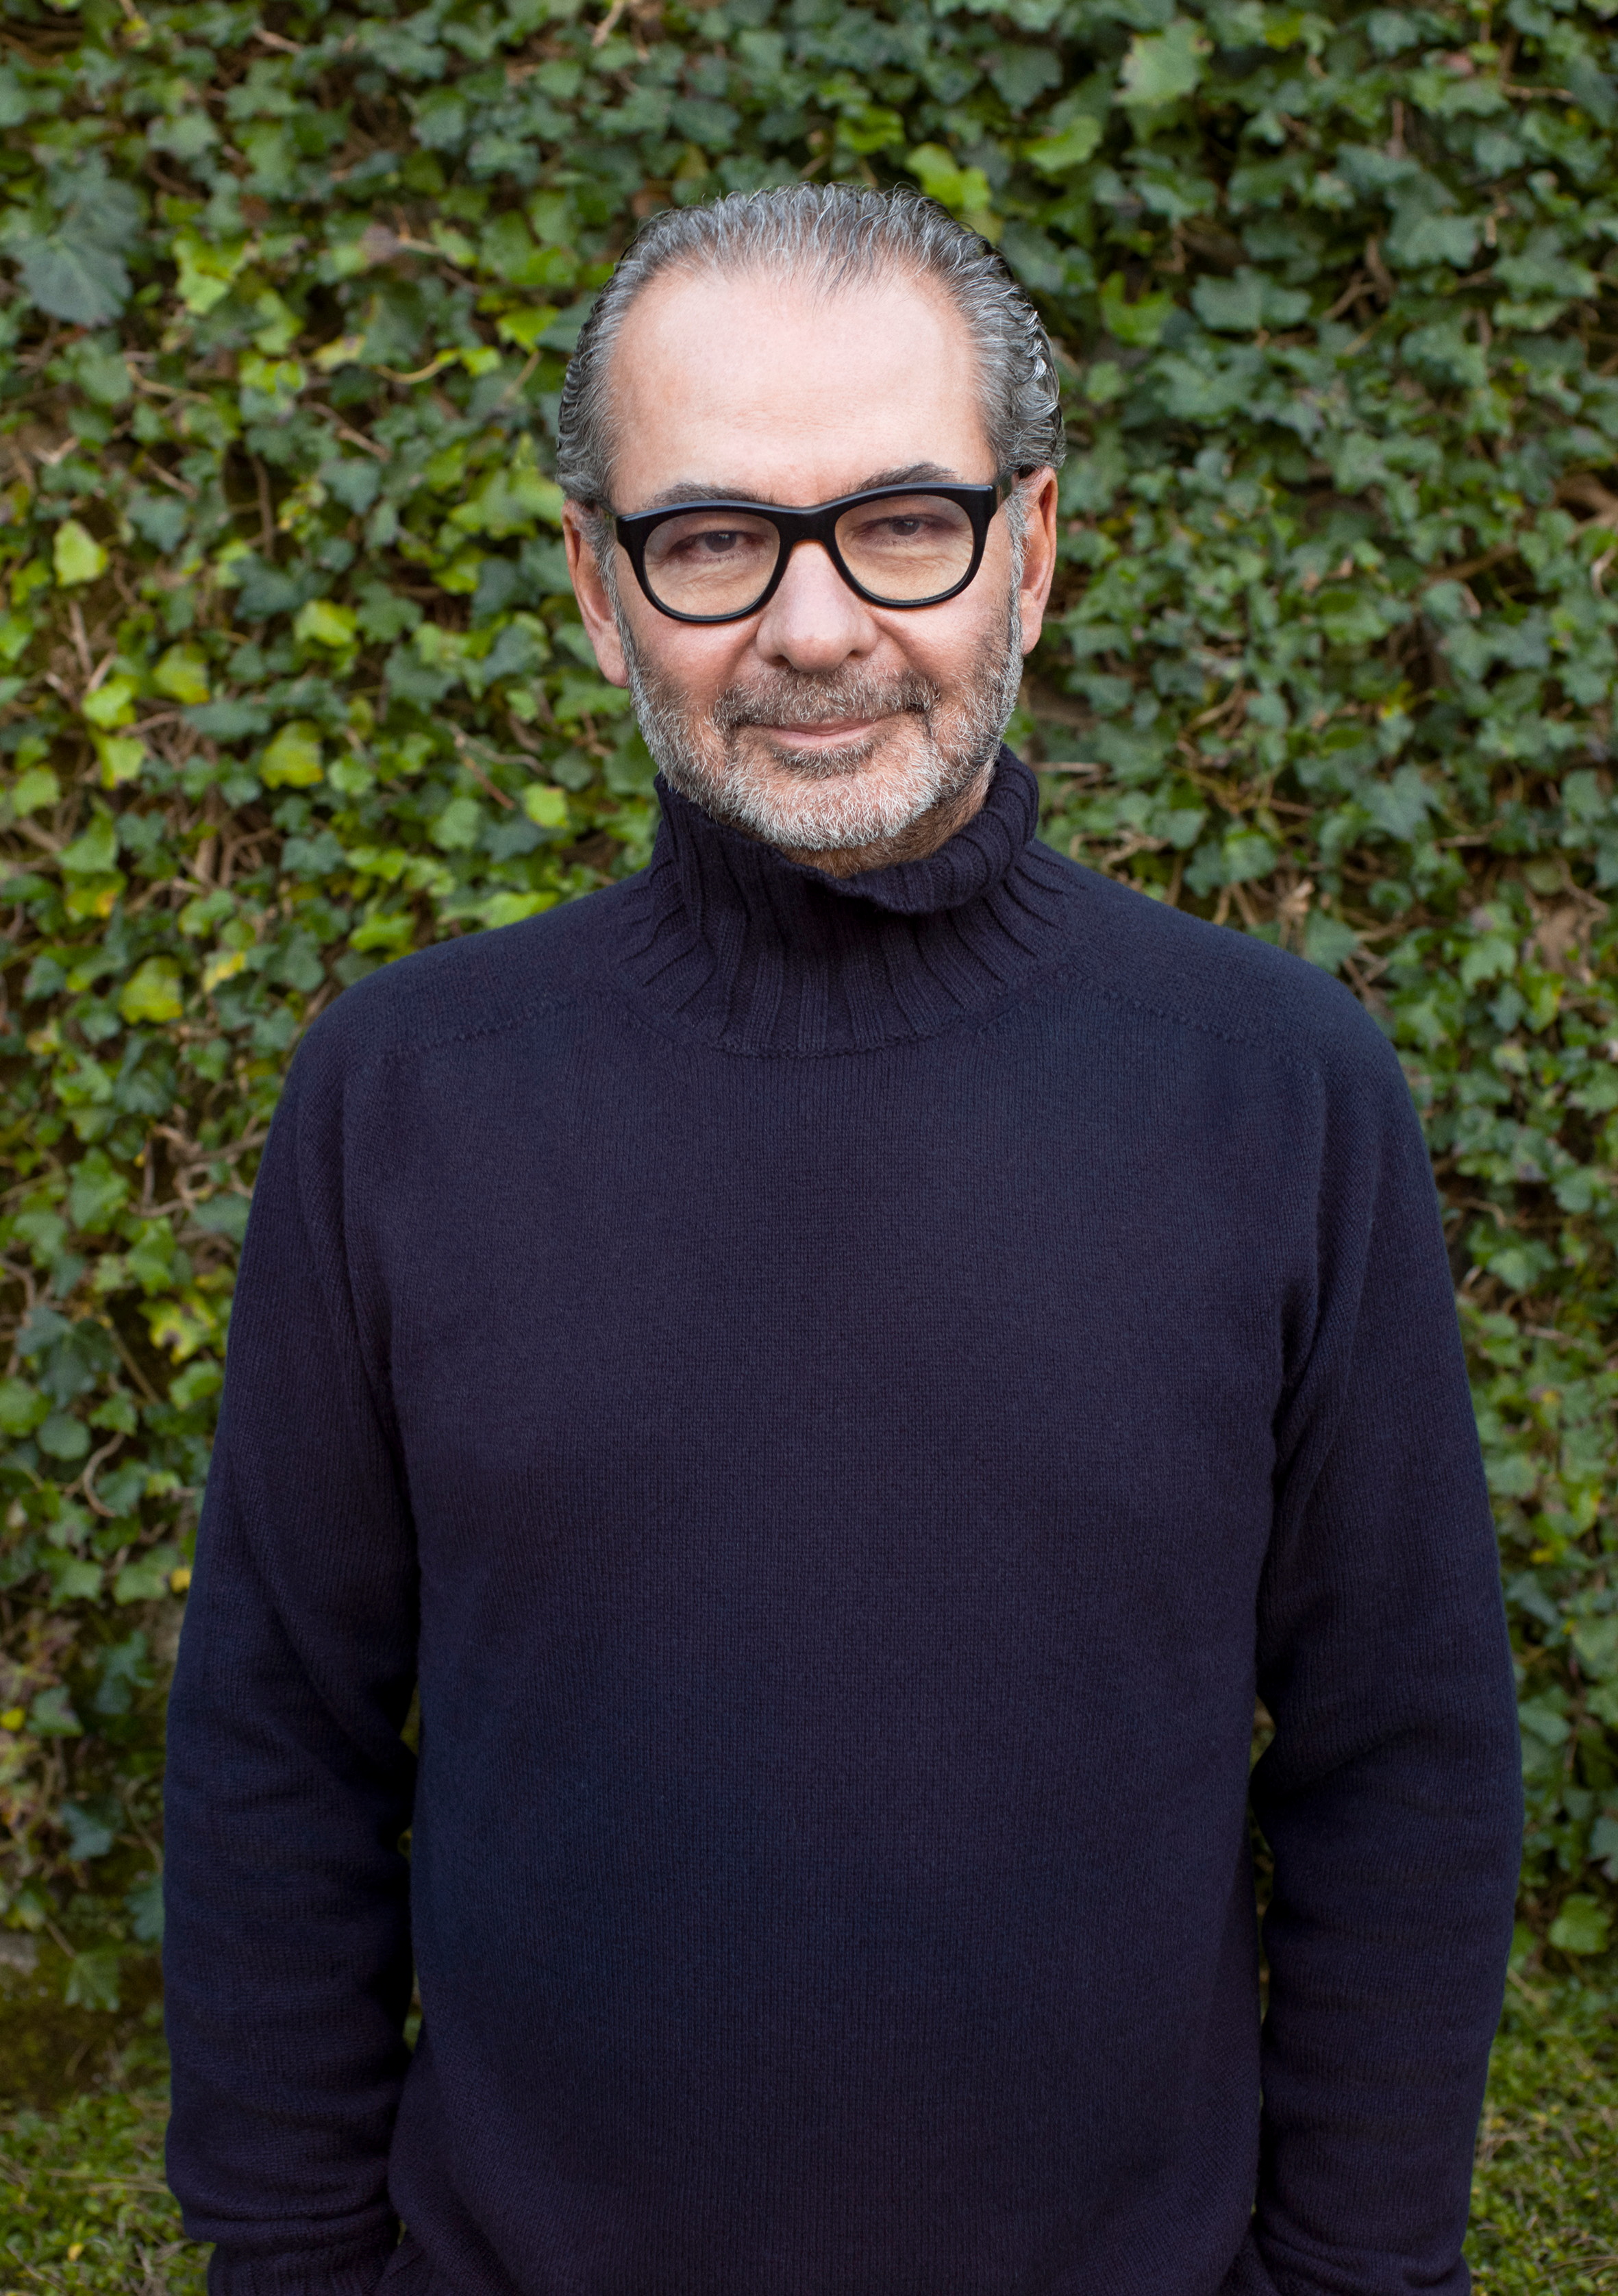 Remo Ruffini on Moncler's Stone Island Deal